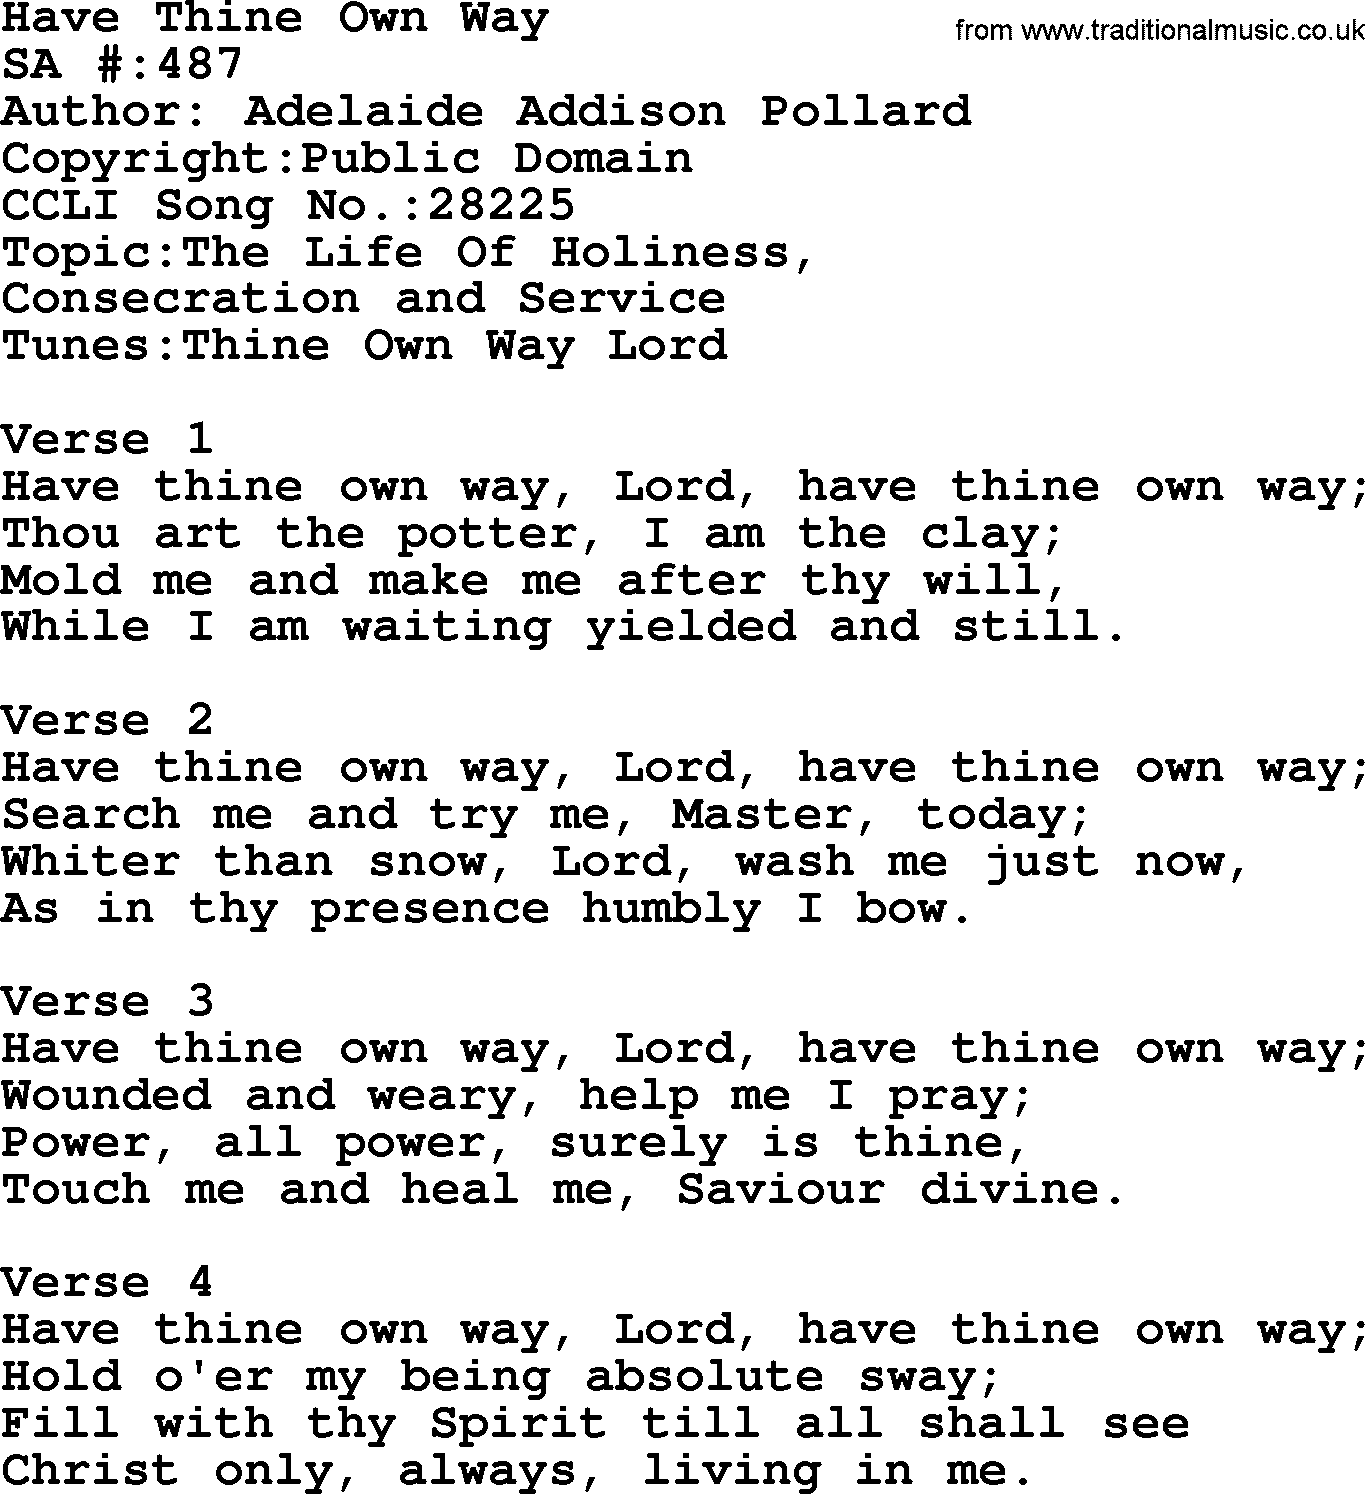 Salvation Army Hymnal, title: Have Thine Own Way, with lyrics and PDF,